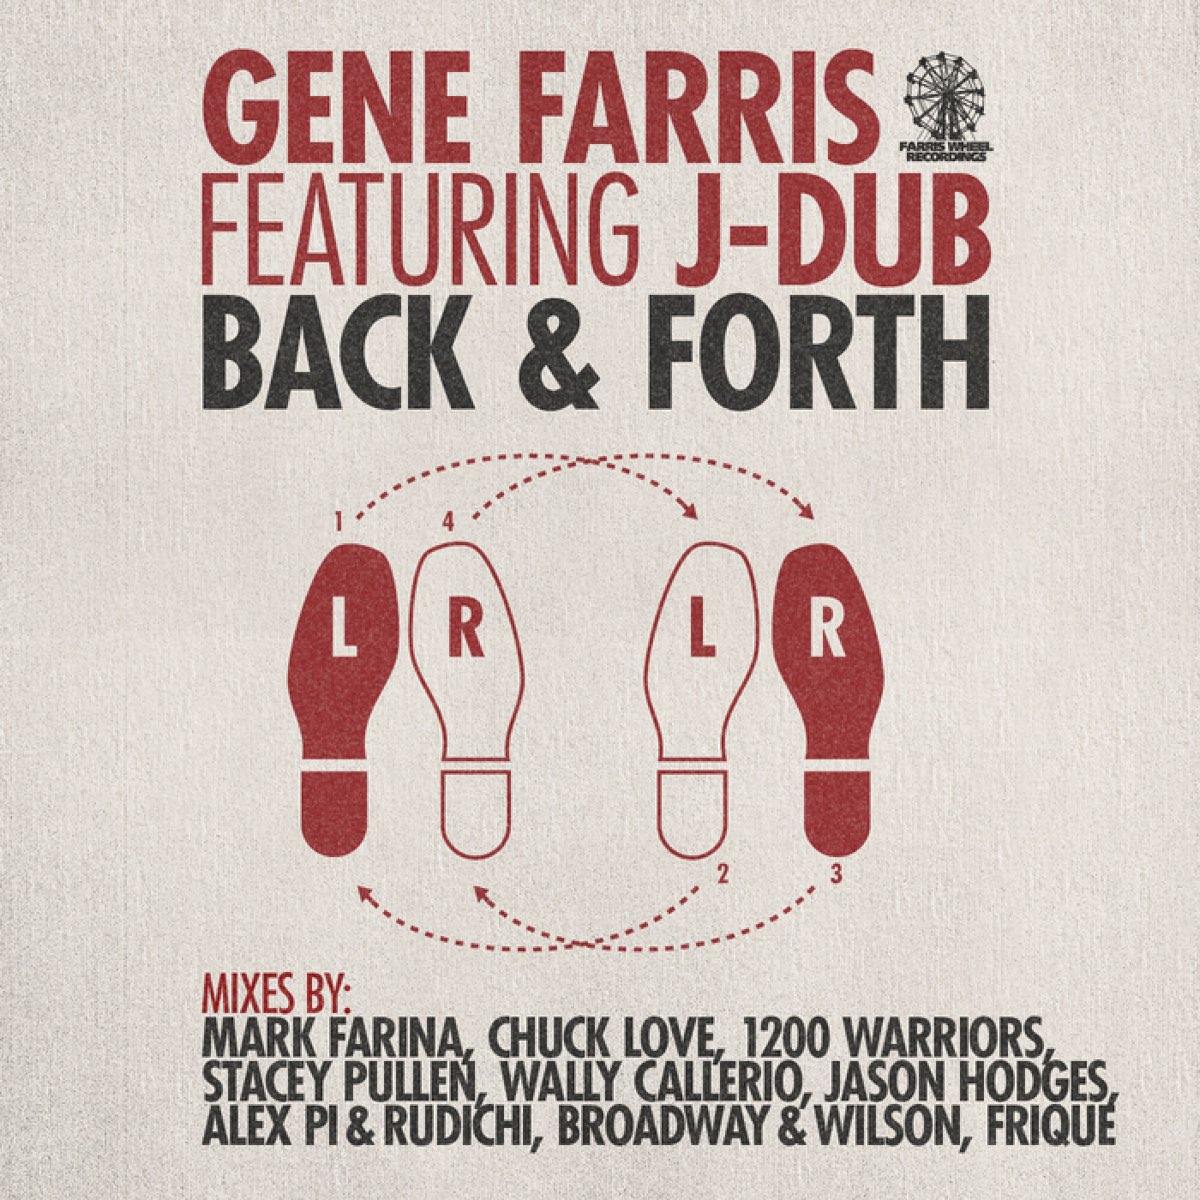 Back feature. Back and forth. Forth back back forth. Gene Farris. Обои Twins Edge back and forth.